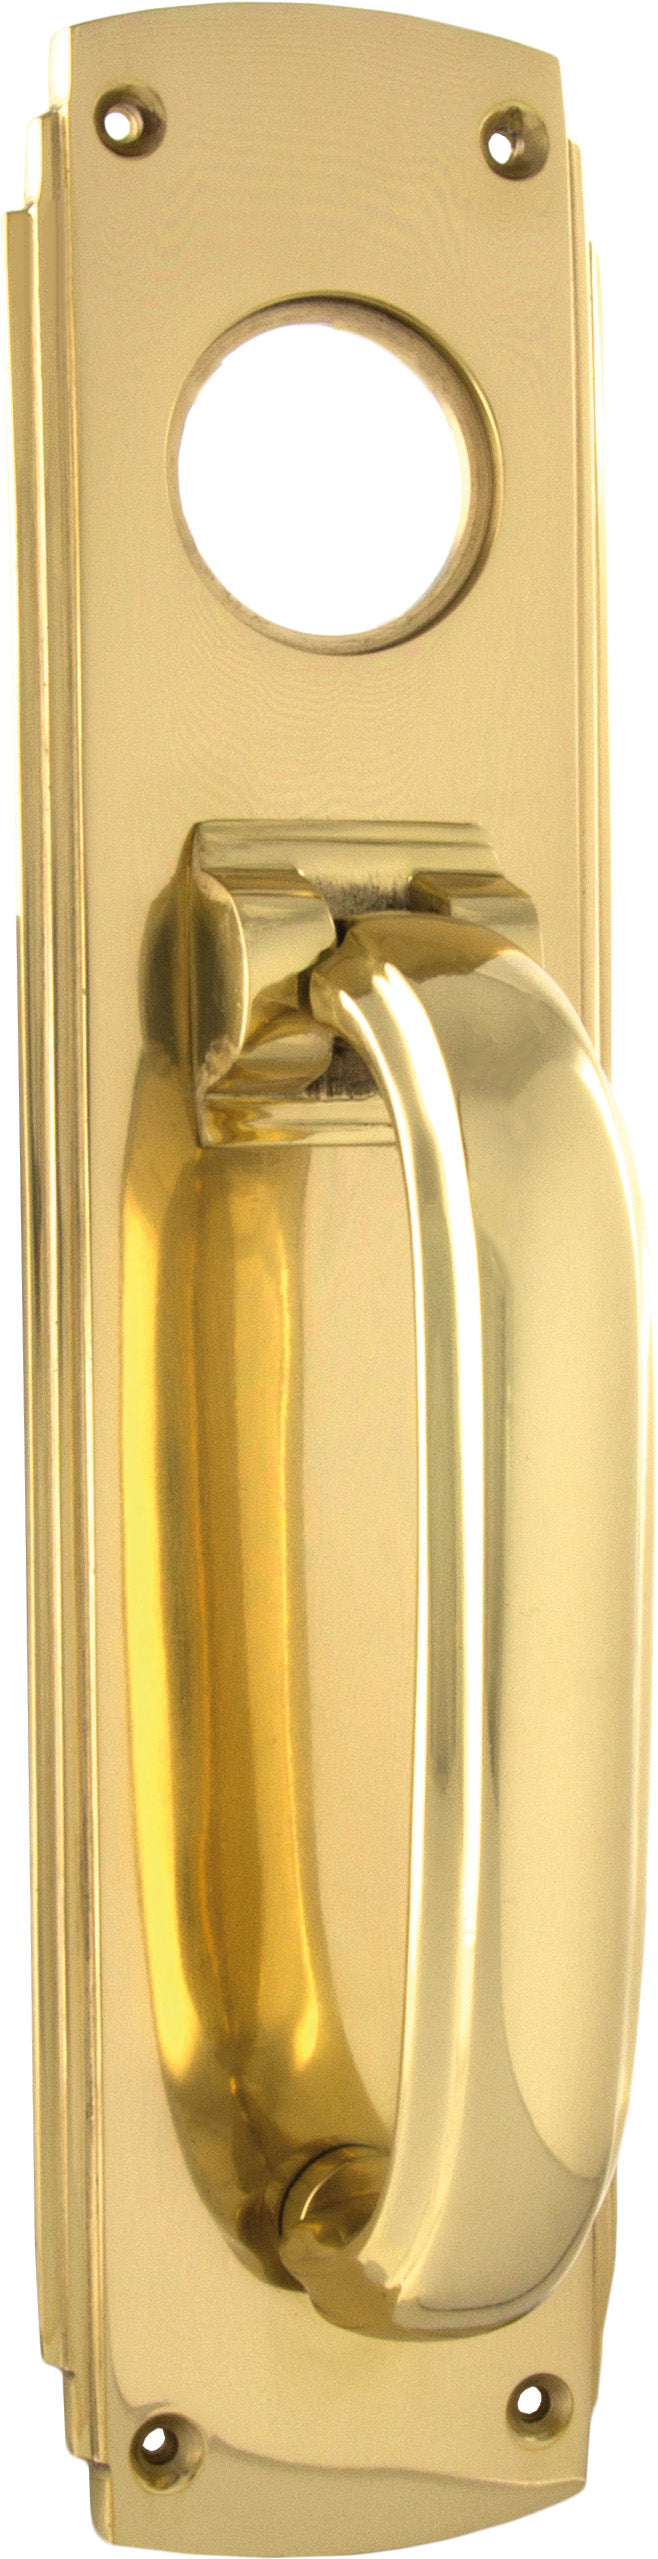 Deco Pull Handle & Knocker by Tradco